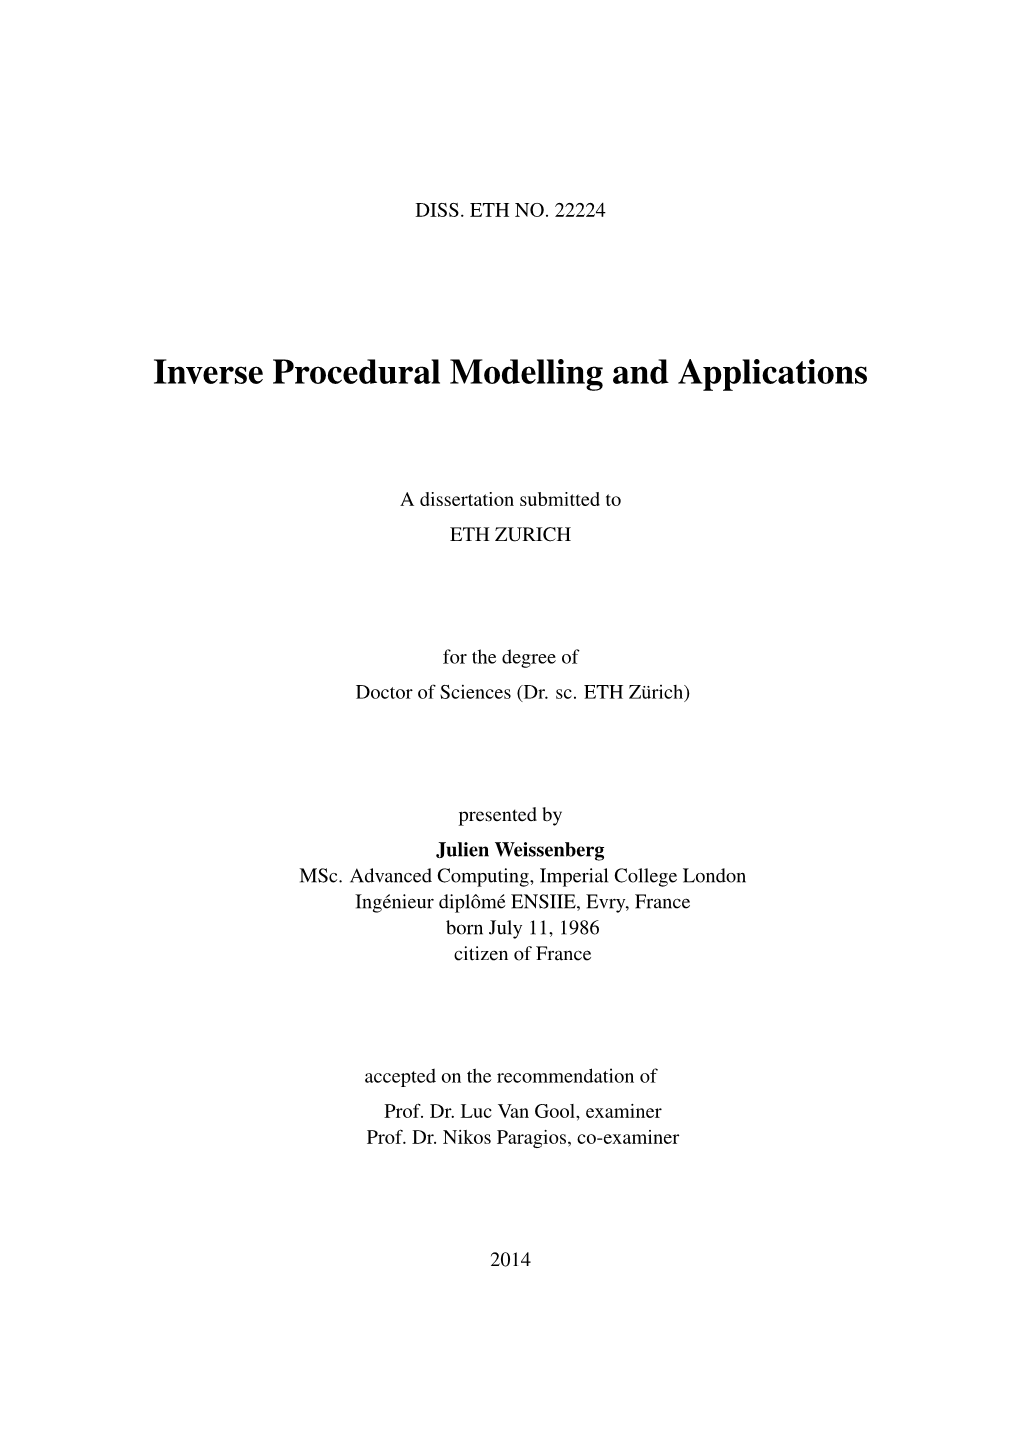 Inverse Procedural Modelling and Applications